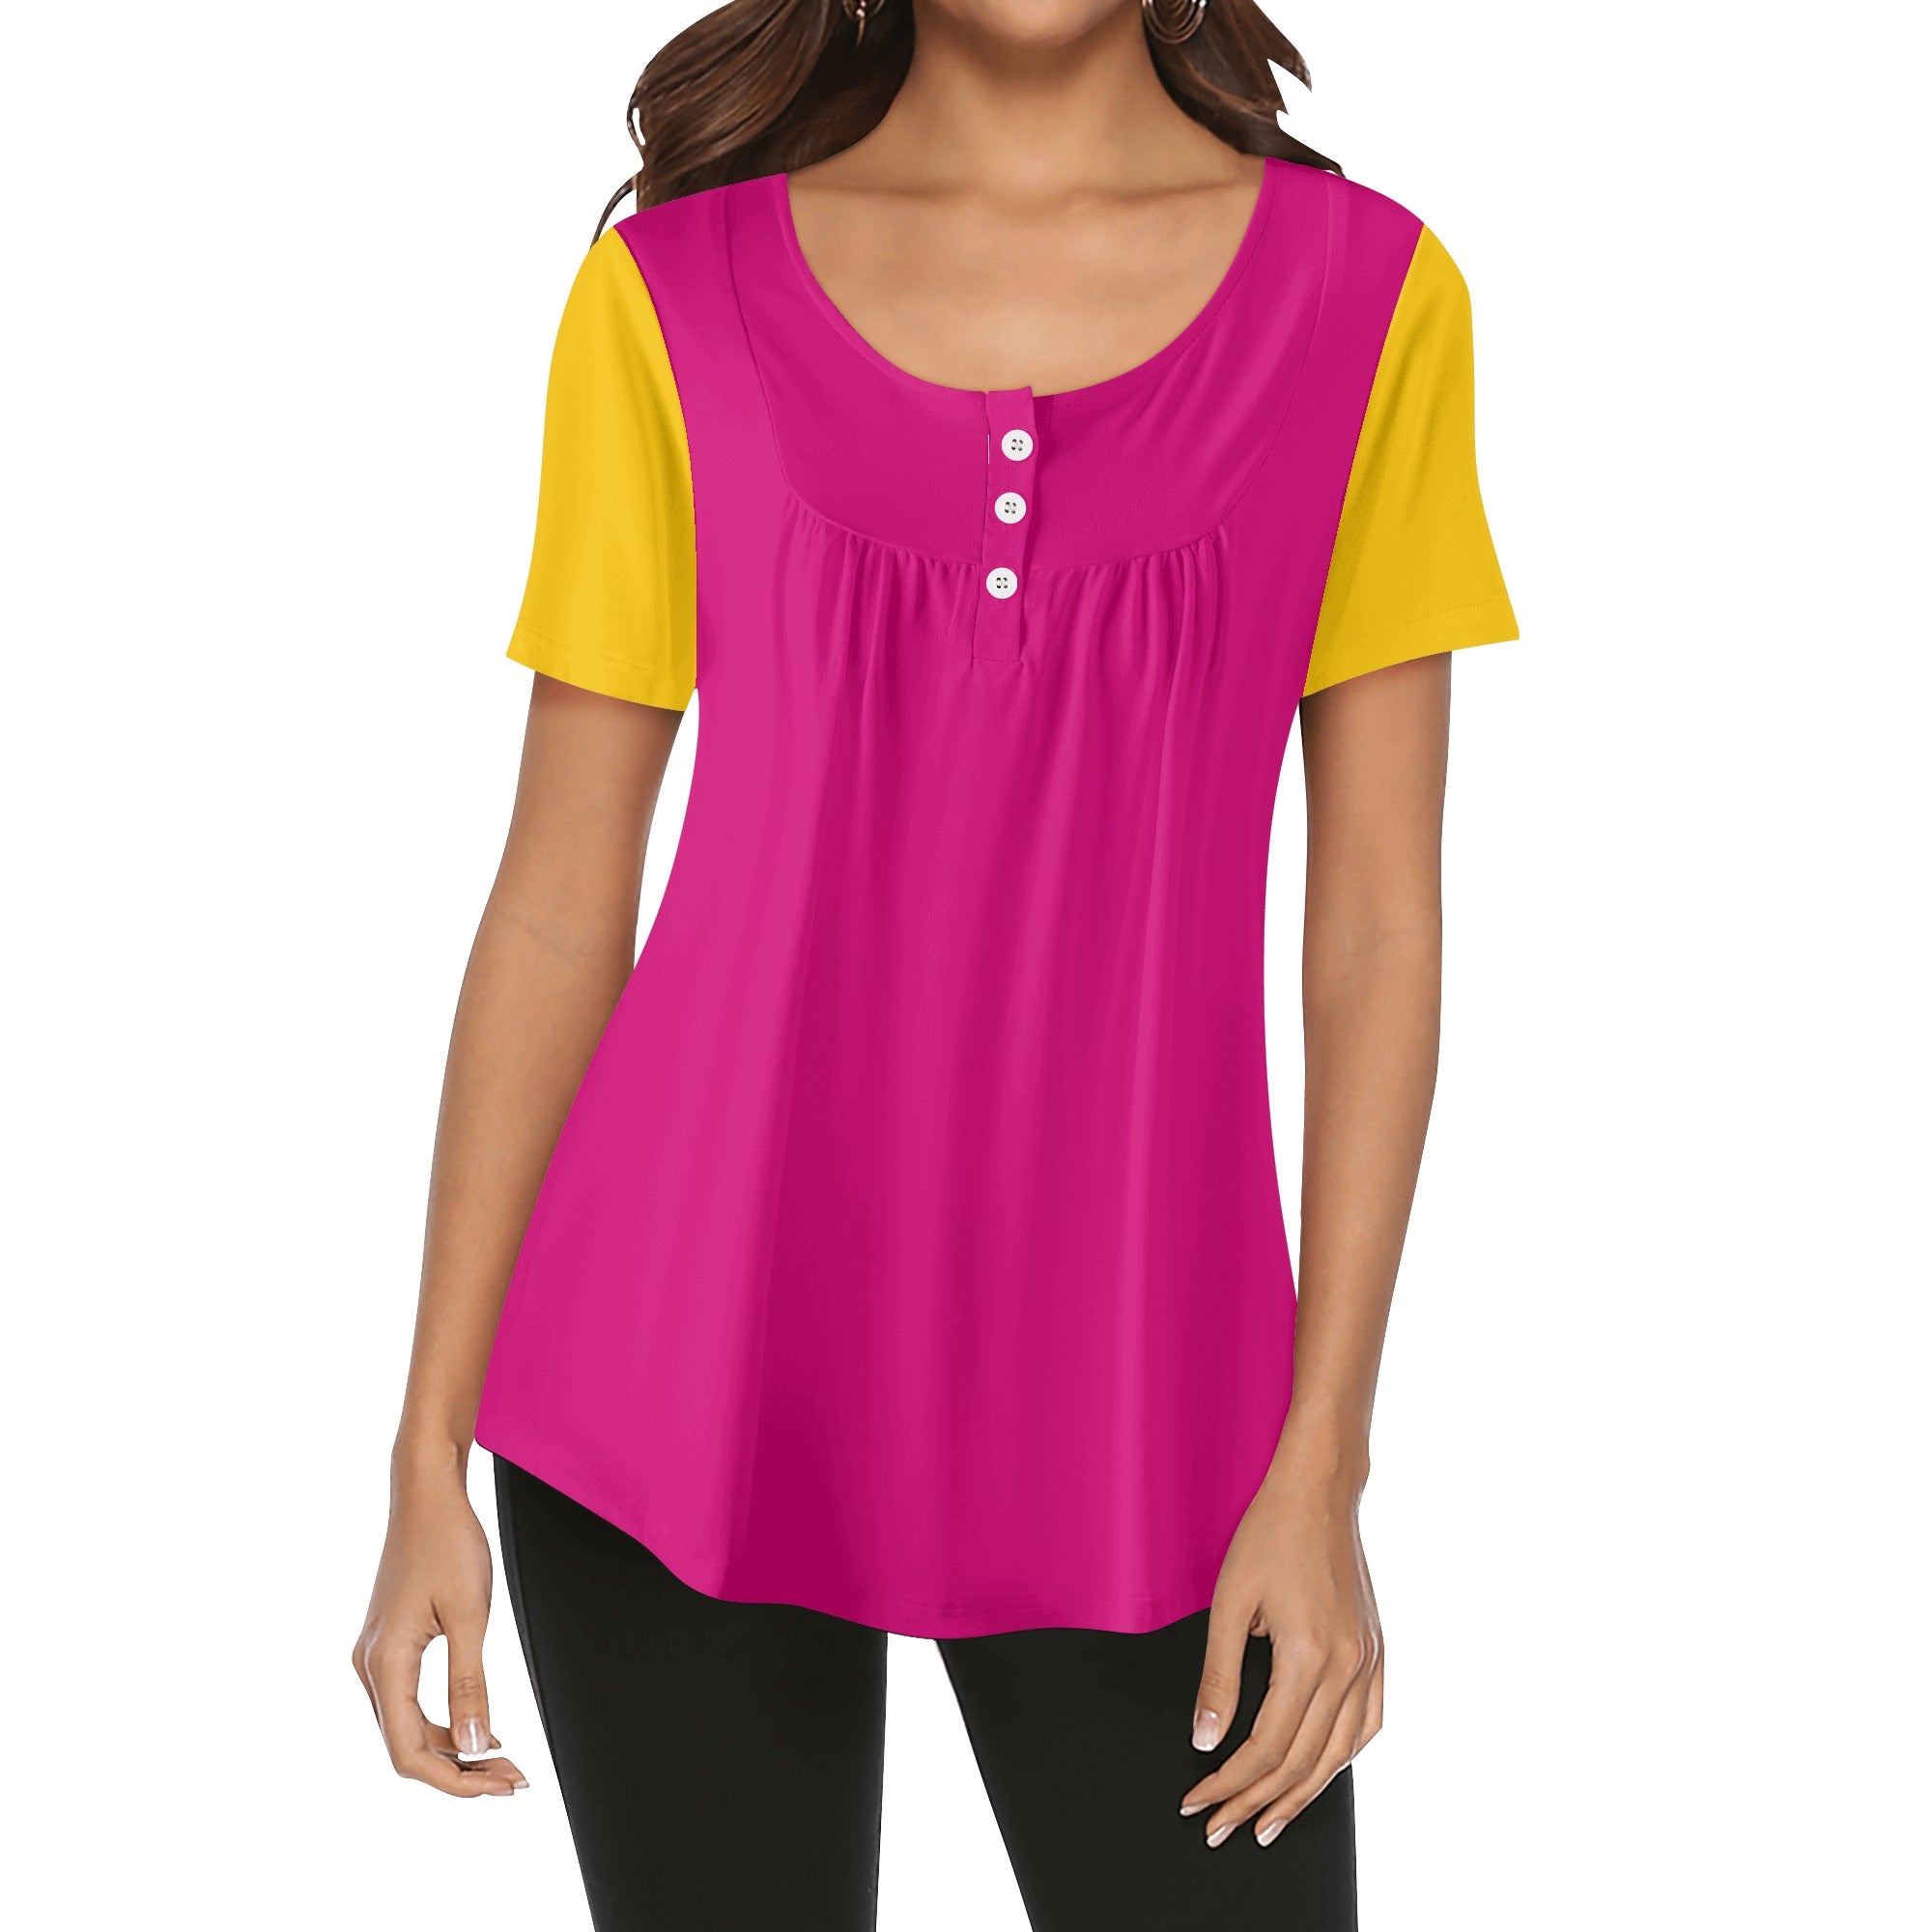 Flight 929 Pink Yellow Scoop Neck Contrast Relaxed  Babydoll Top Plus Sizes- Bold Vibrant Airline Series 